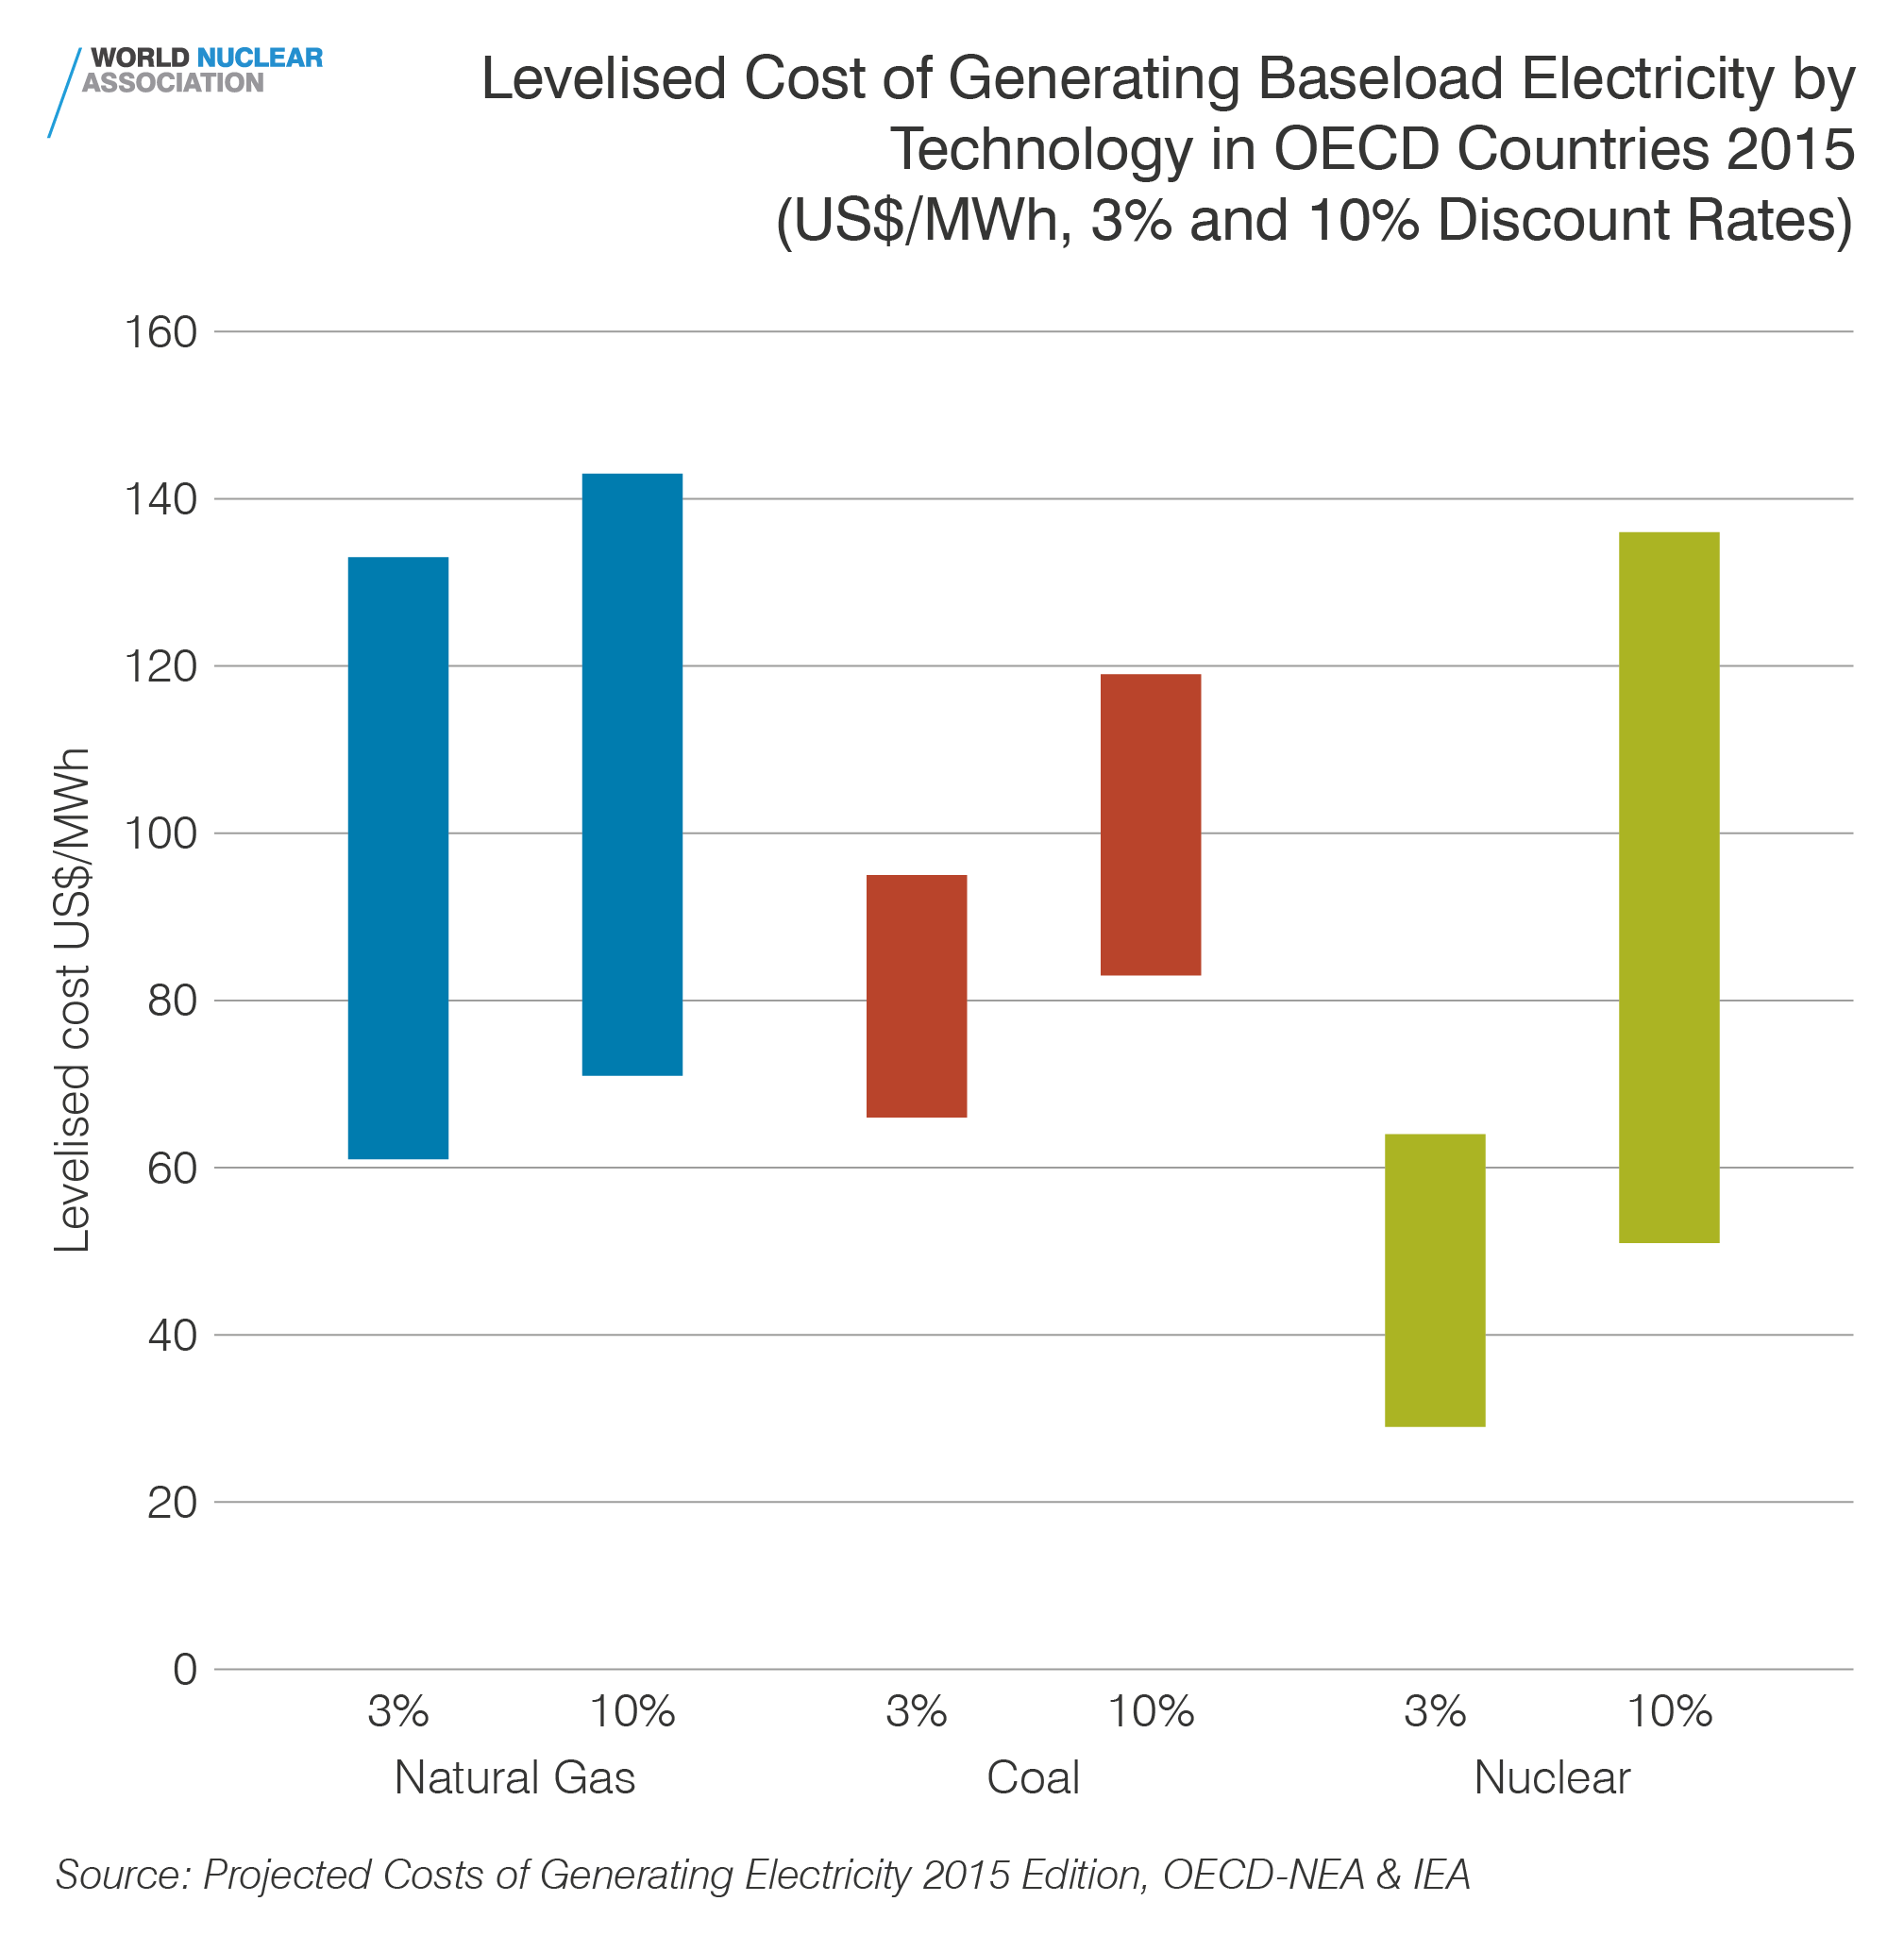 Levelised cost of generating baseload electricity by technology in OECD countries 2015